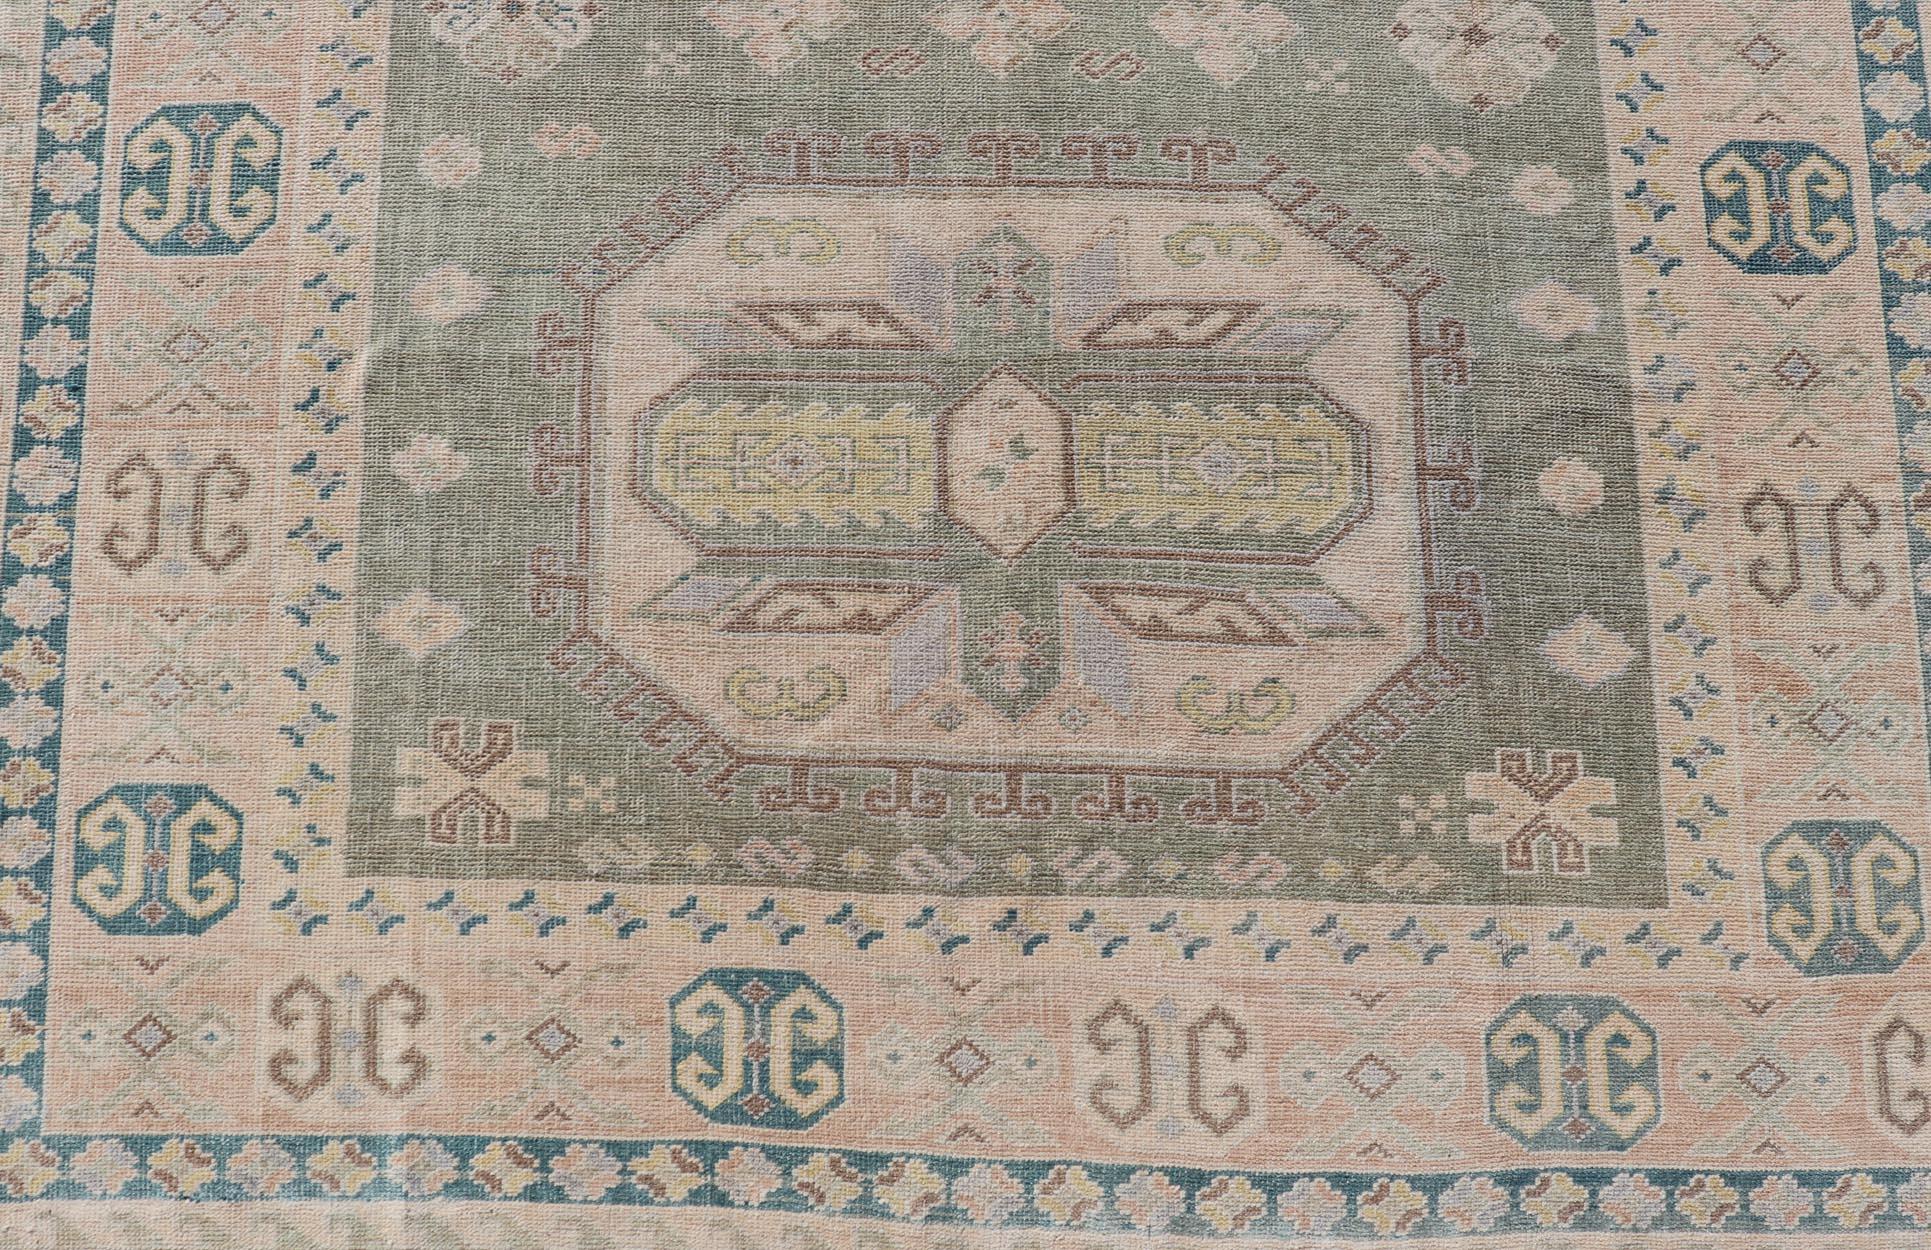 Measures: 6'0 x 9'10 
Turkish Vintage Tribal Medallion Oushak in Muted Green, Blue, and Cream. Country of Origin: Turkey; Type: Oushak; Design: Medallion, Tribal Medallion, All-Over, Tribal; Keivan Woven Arts; rug TU-MTU-991. mid-20th century.